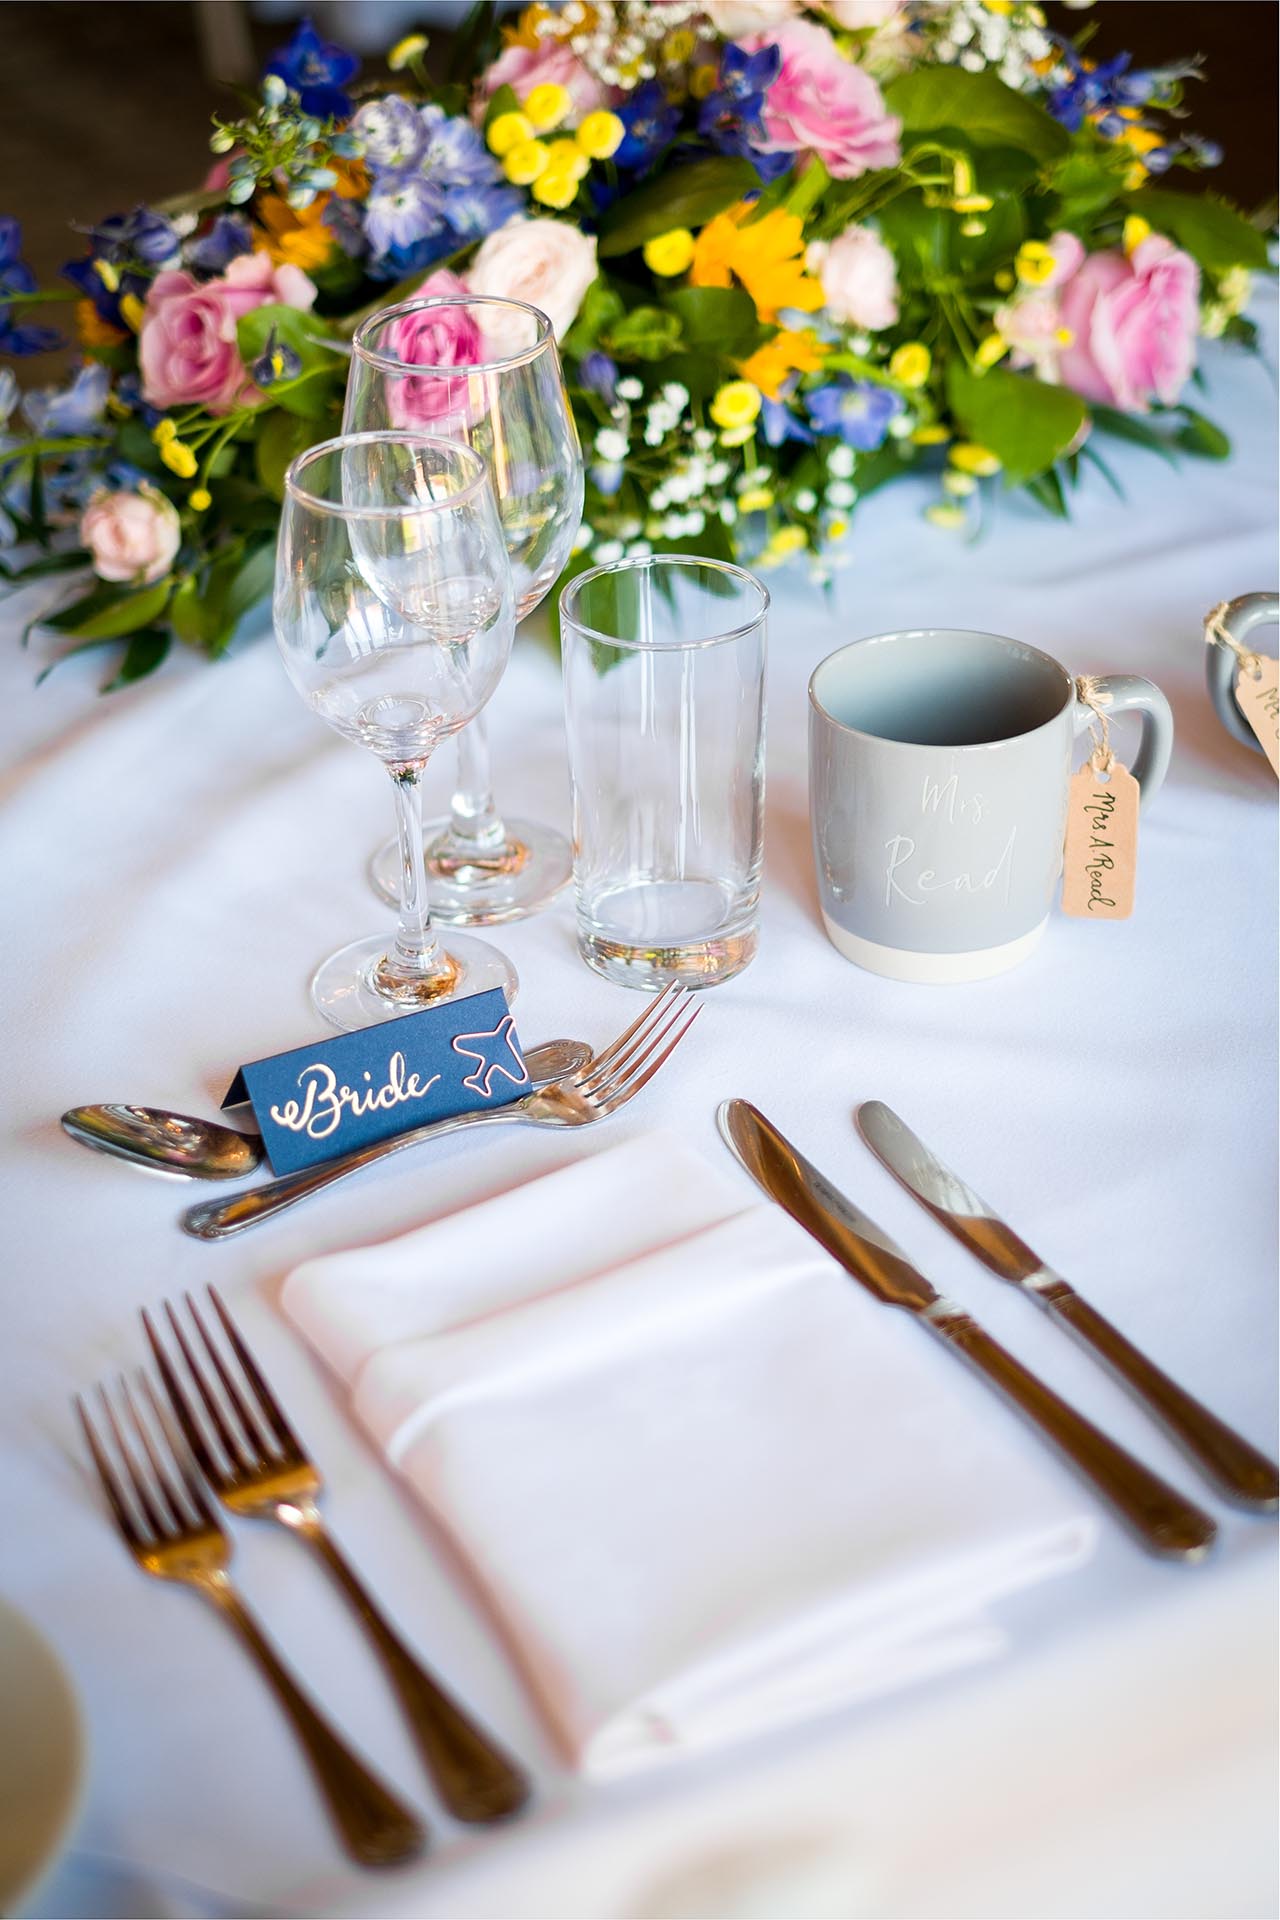 Bespoke table decorations for wedding breakfast at Leez Priory, Great Leighs, Chelmsford, by Essex wedding photographer